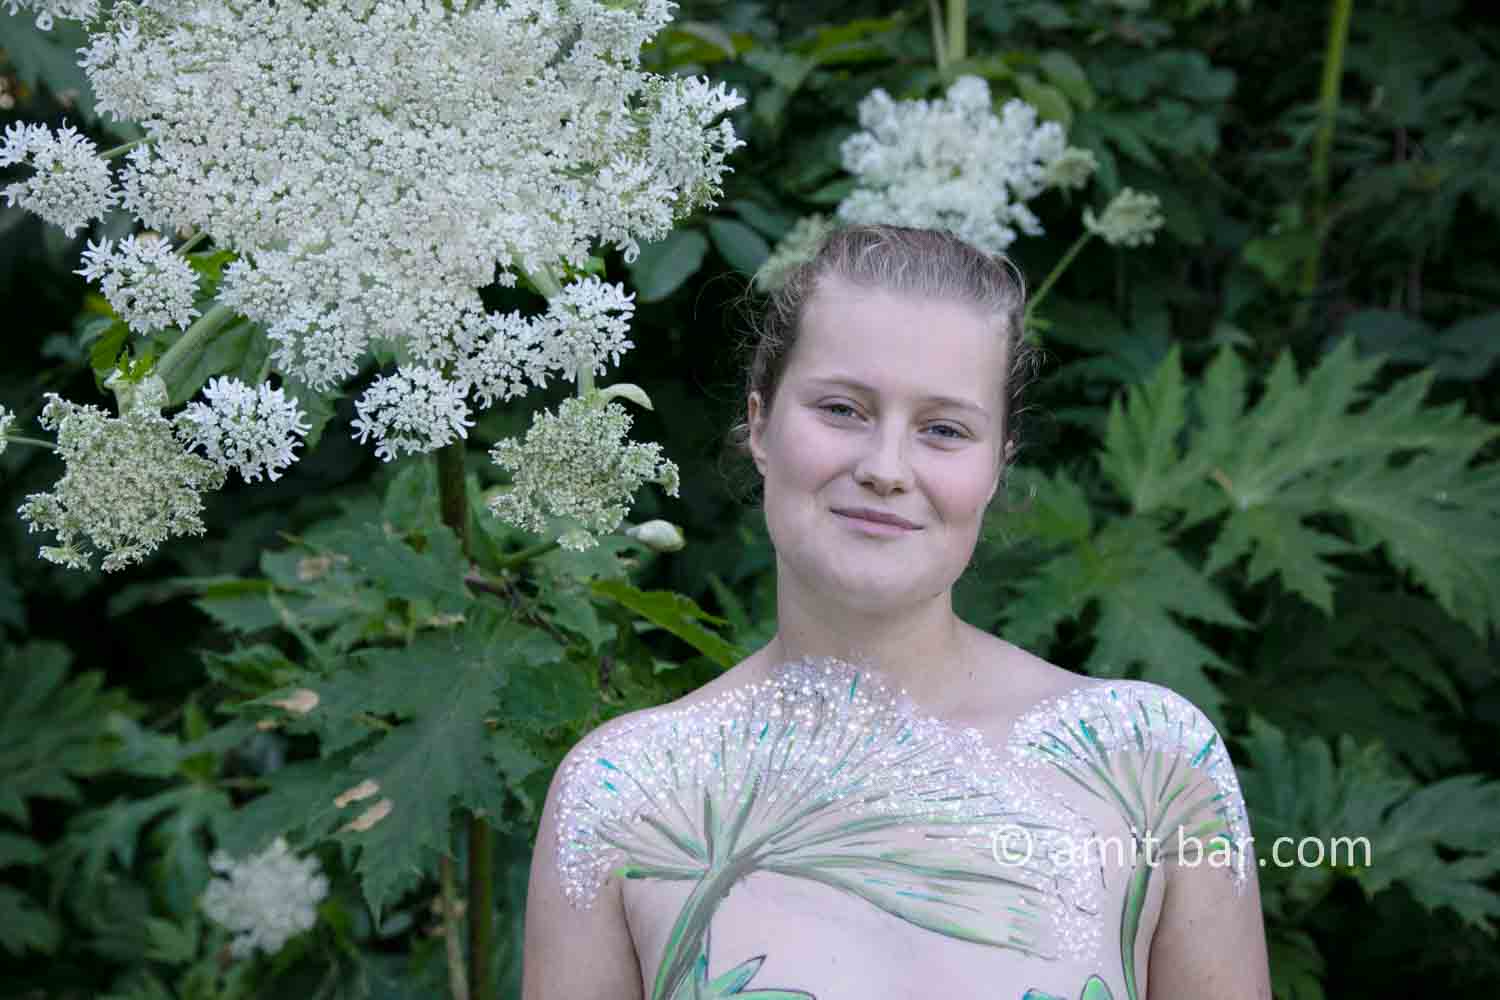 Hogweed plant portrait I: A Portrait of Shelly, who is walking along the beautiful Giant Hogweed plant